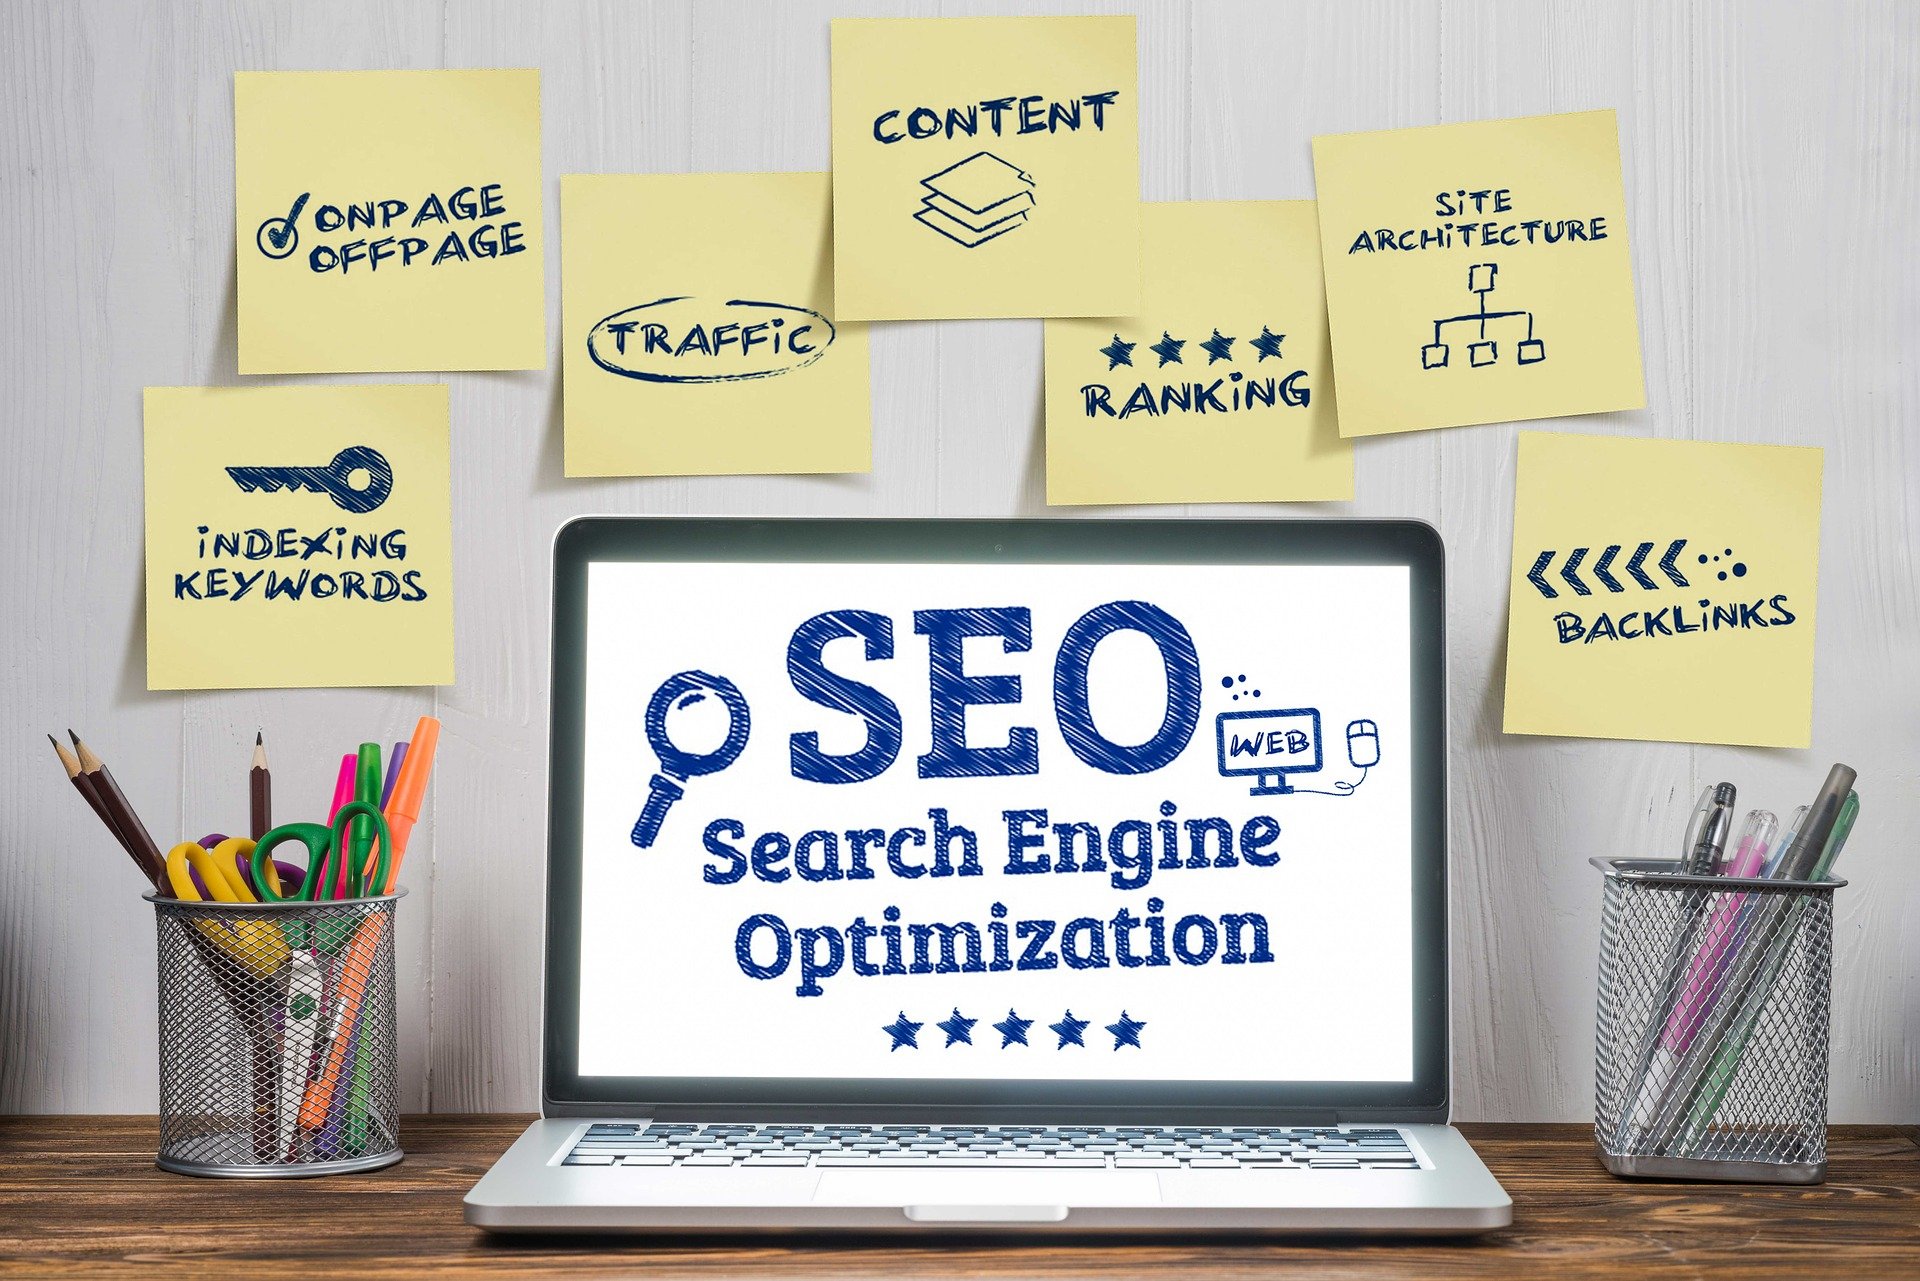 What is Off-page SEO? | HTMLGoodies.com